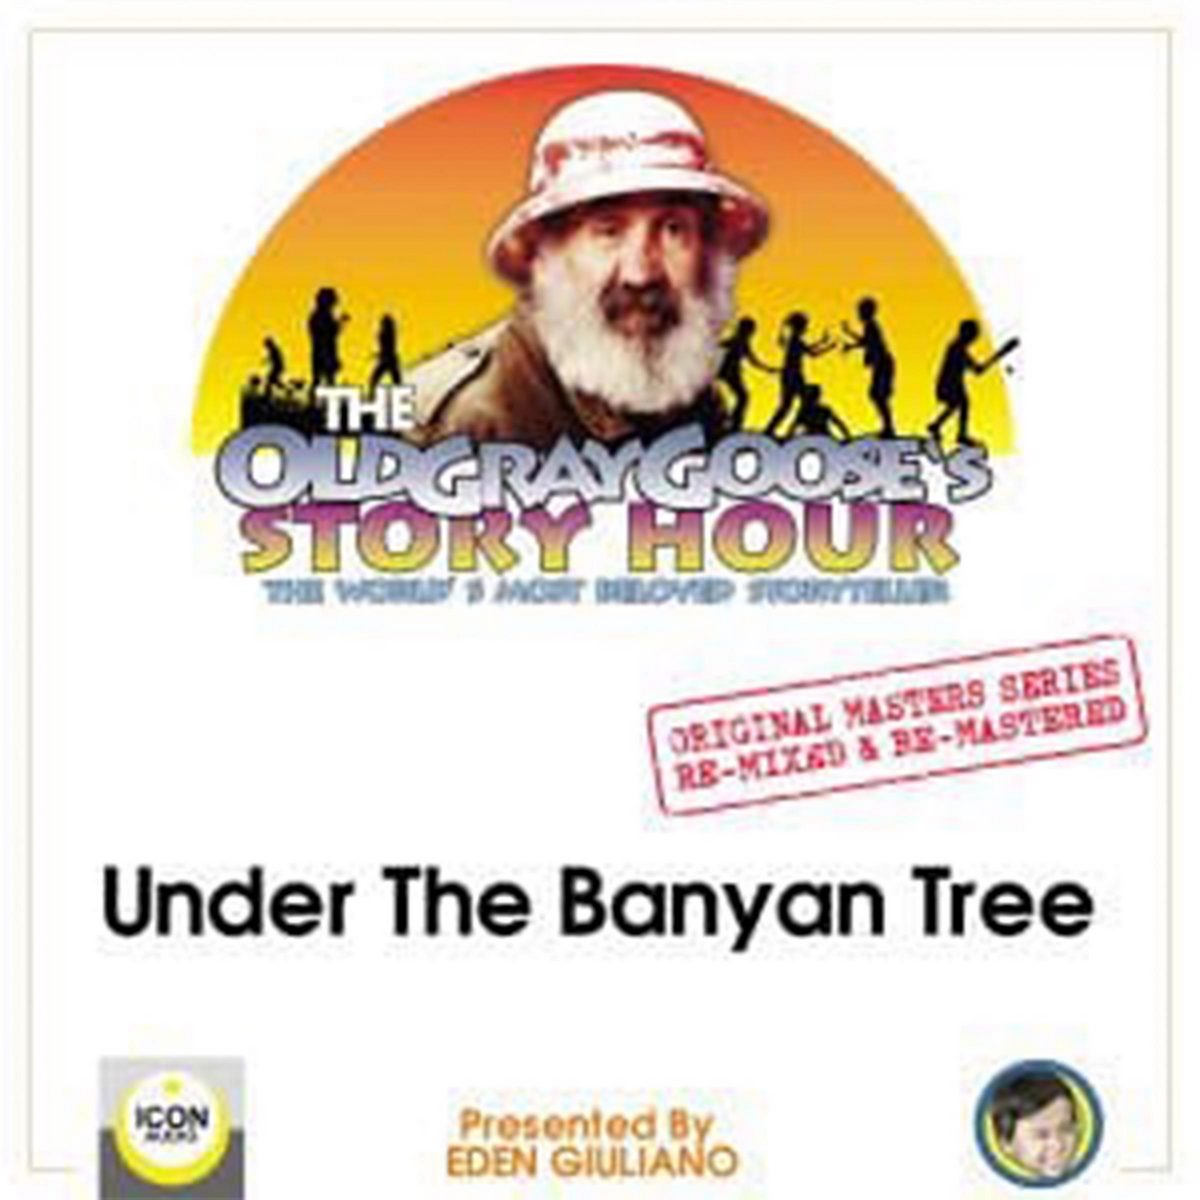 The Old Gray Goose’s Story Hour; The World’s Best Storyteller; Original Masters Series Re-mixed and Re-mastered; Under The Banyan Tree